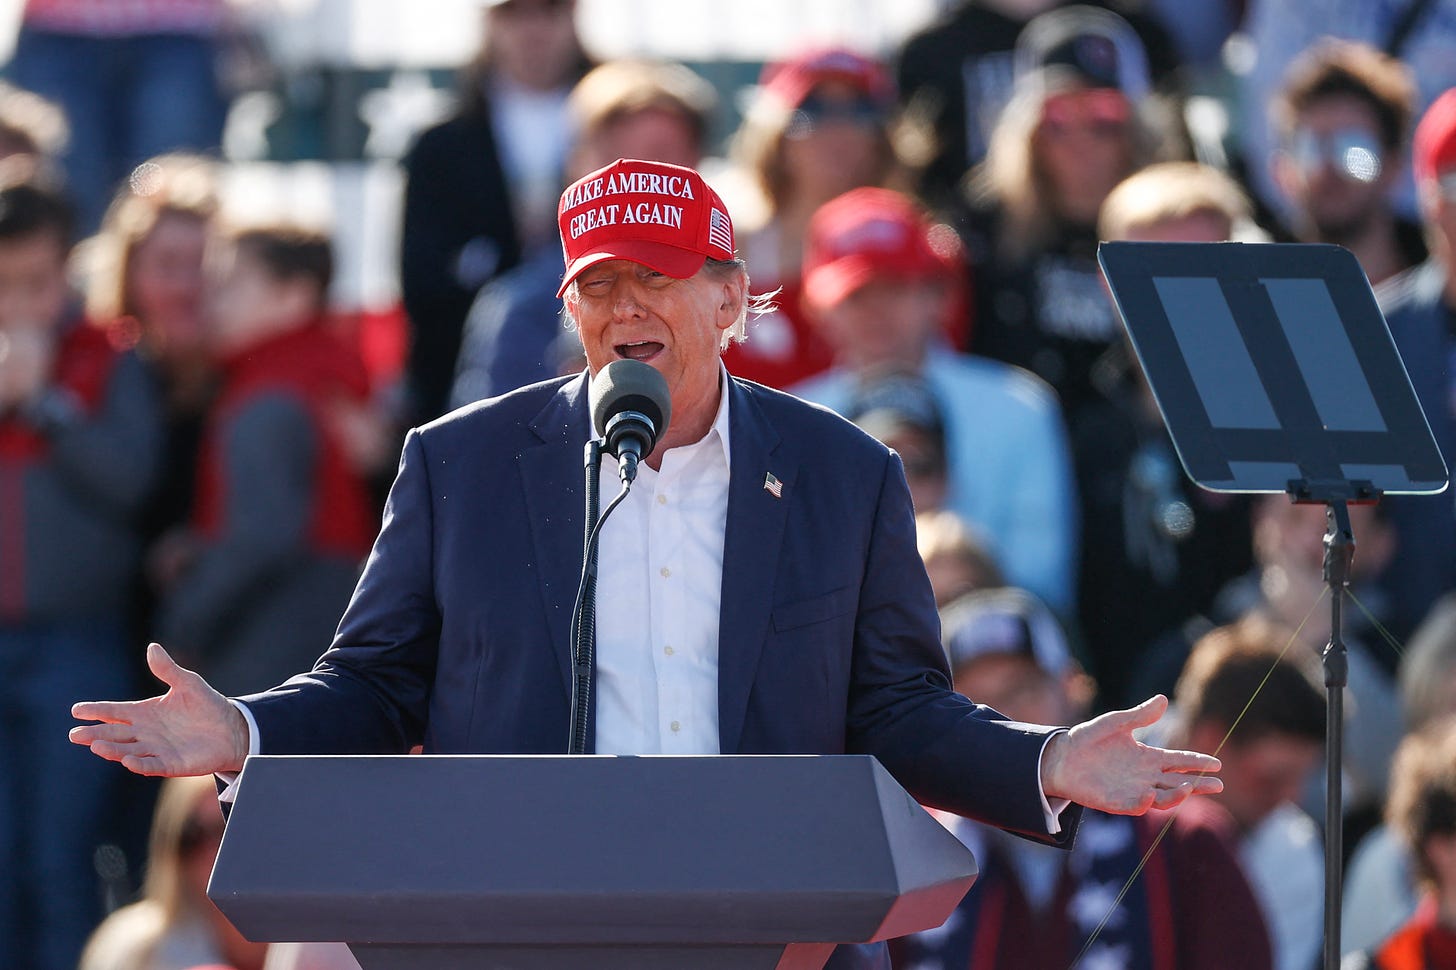 Donald Trump speaks during a rally in Ohio, on March 16, 2024. (Photo by Kamil Krzaczynski / AFP via Getty Images.)